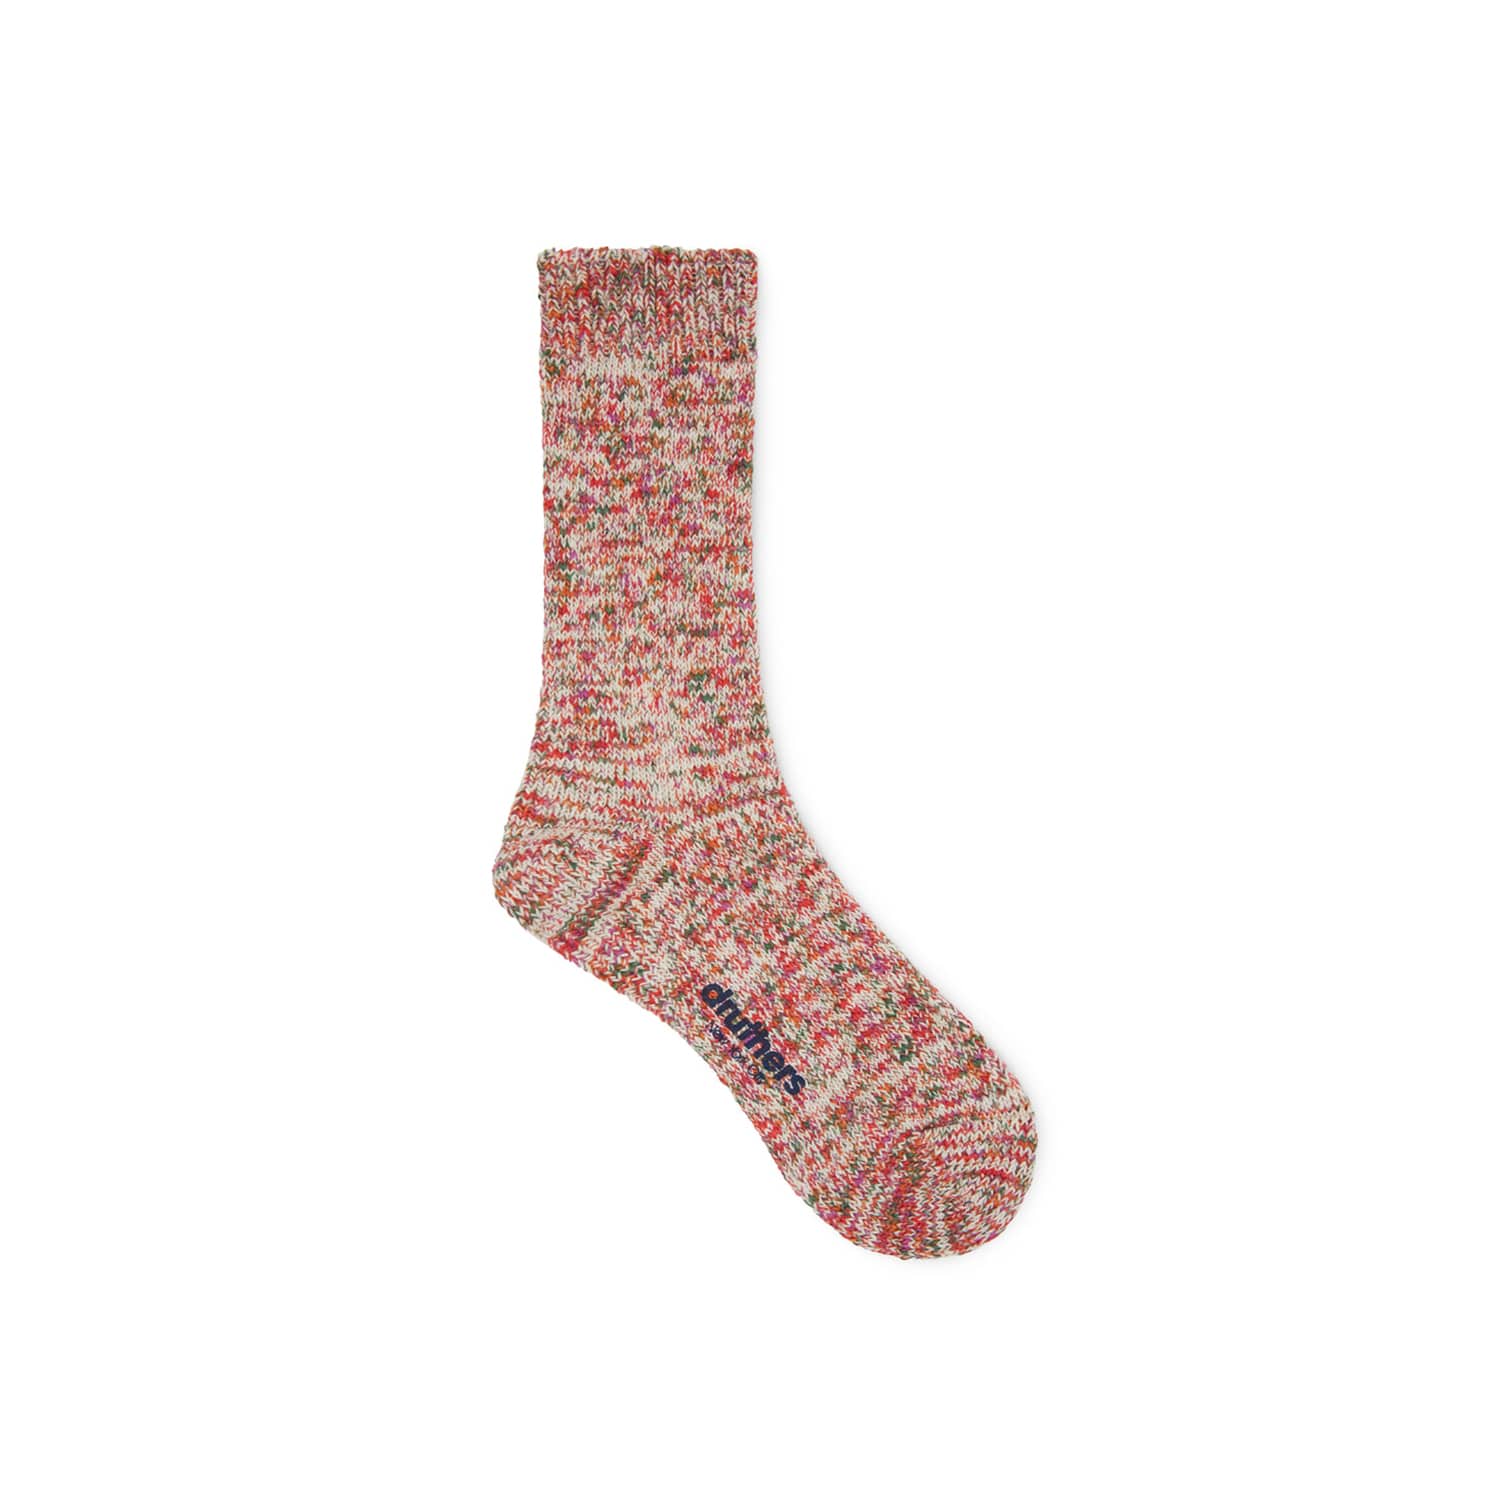 Druthers NYC Hikerdelic Recycled Mélange Crew Sock